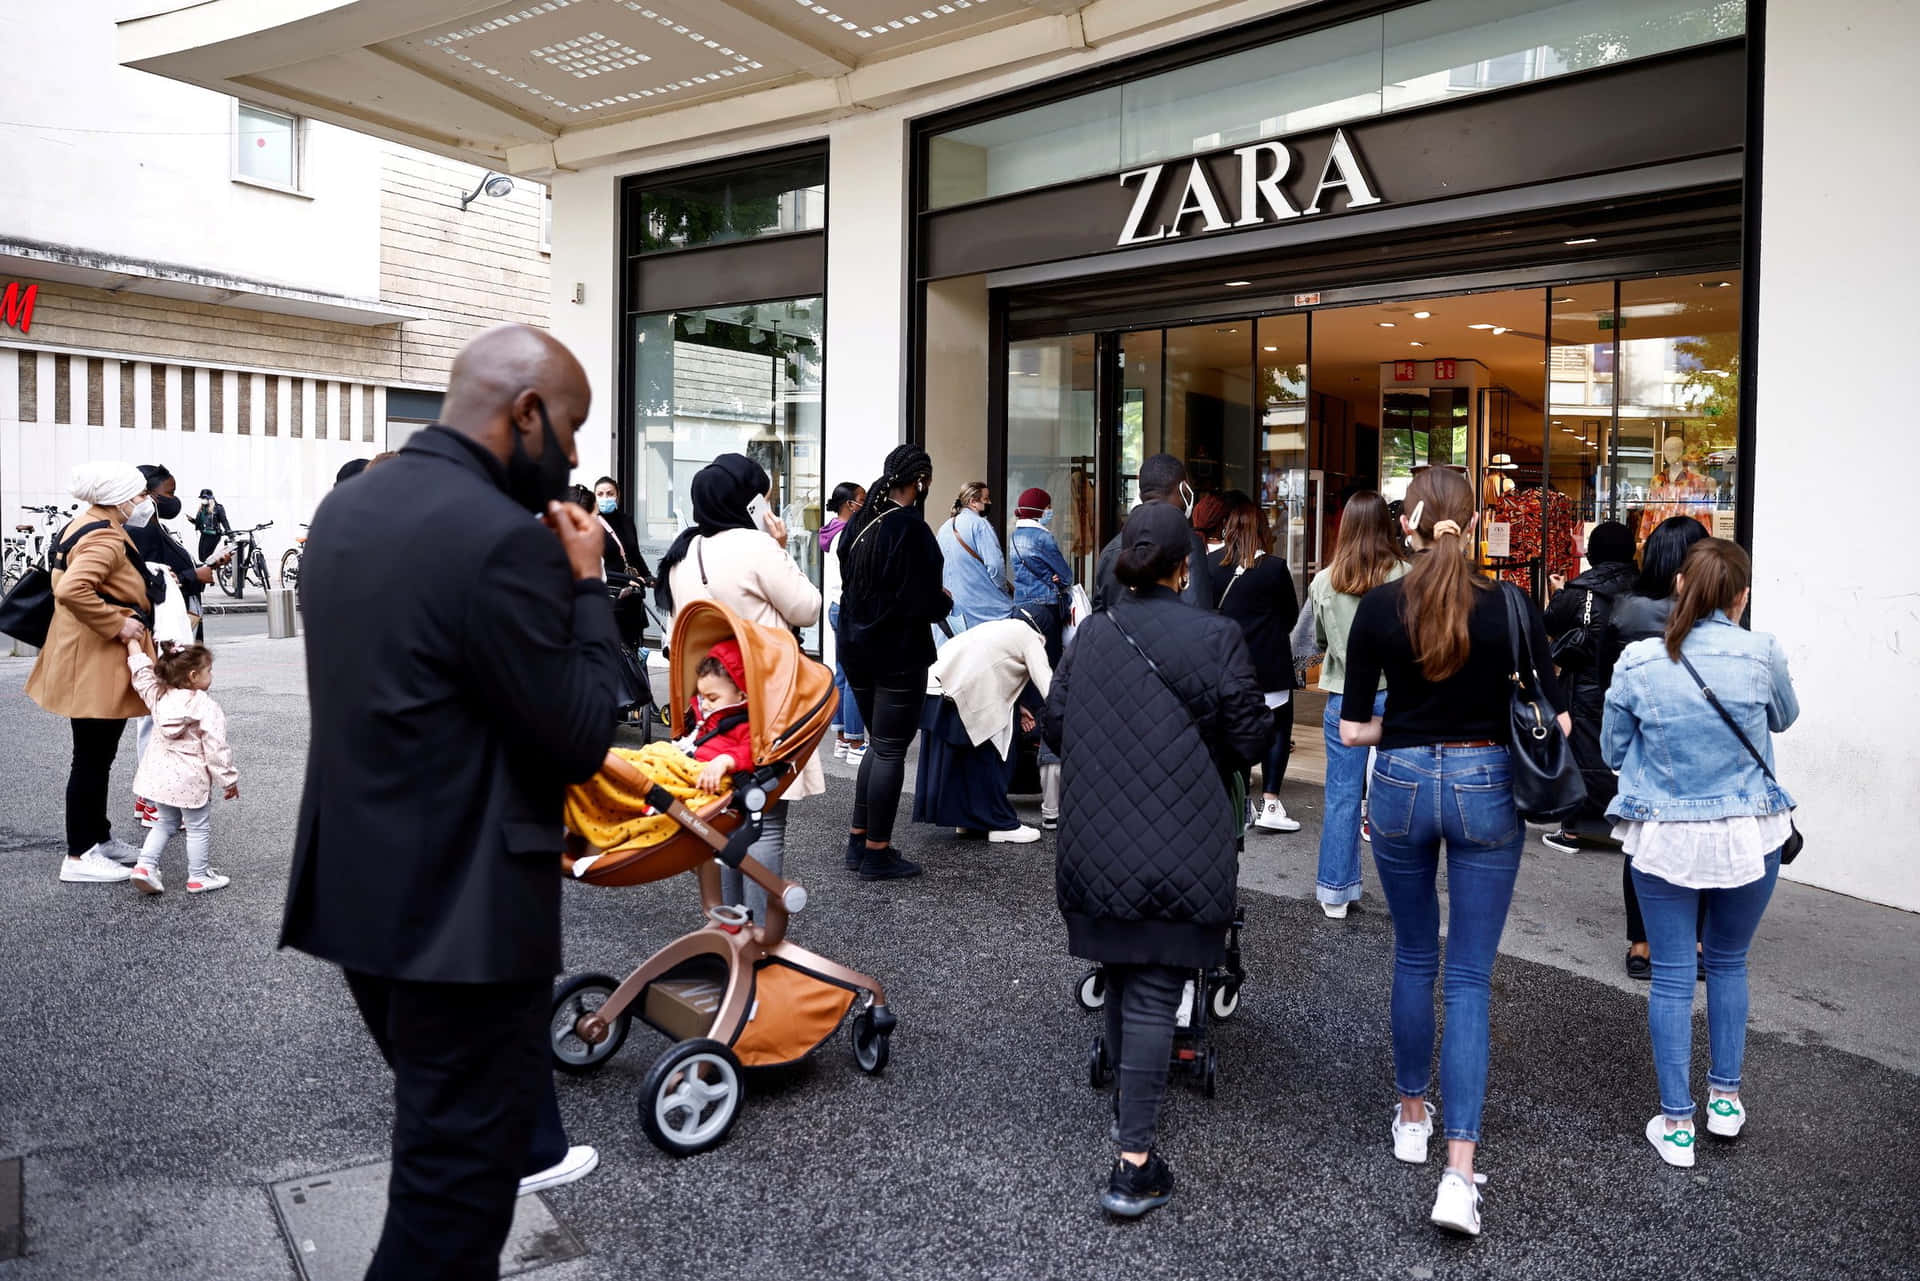 Welcome to Zara! Don't miss the latest fashion trends!